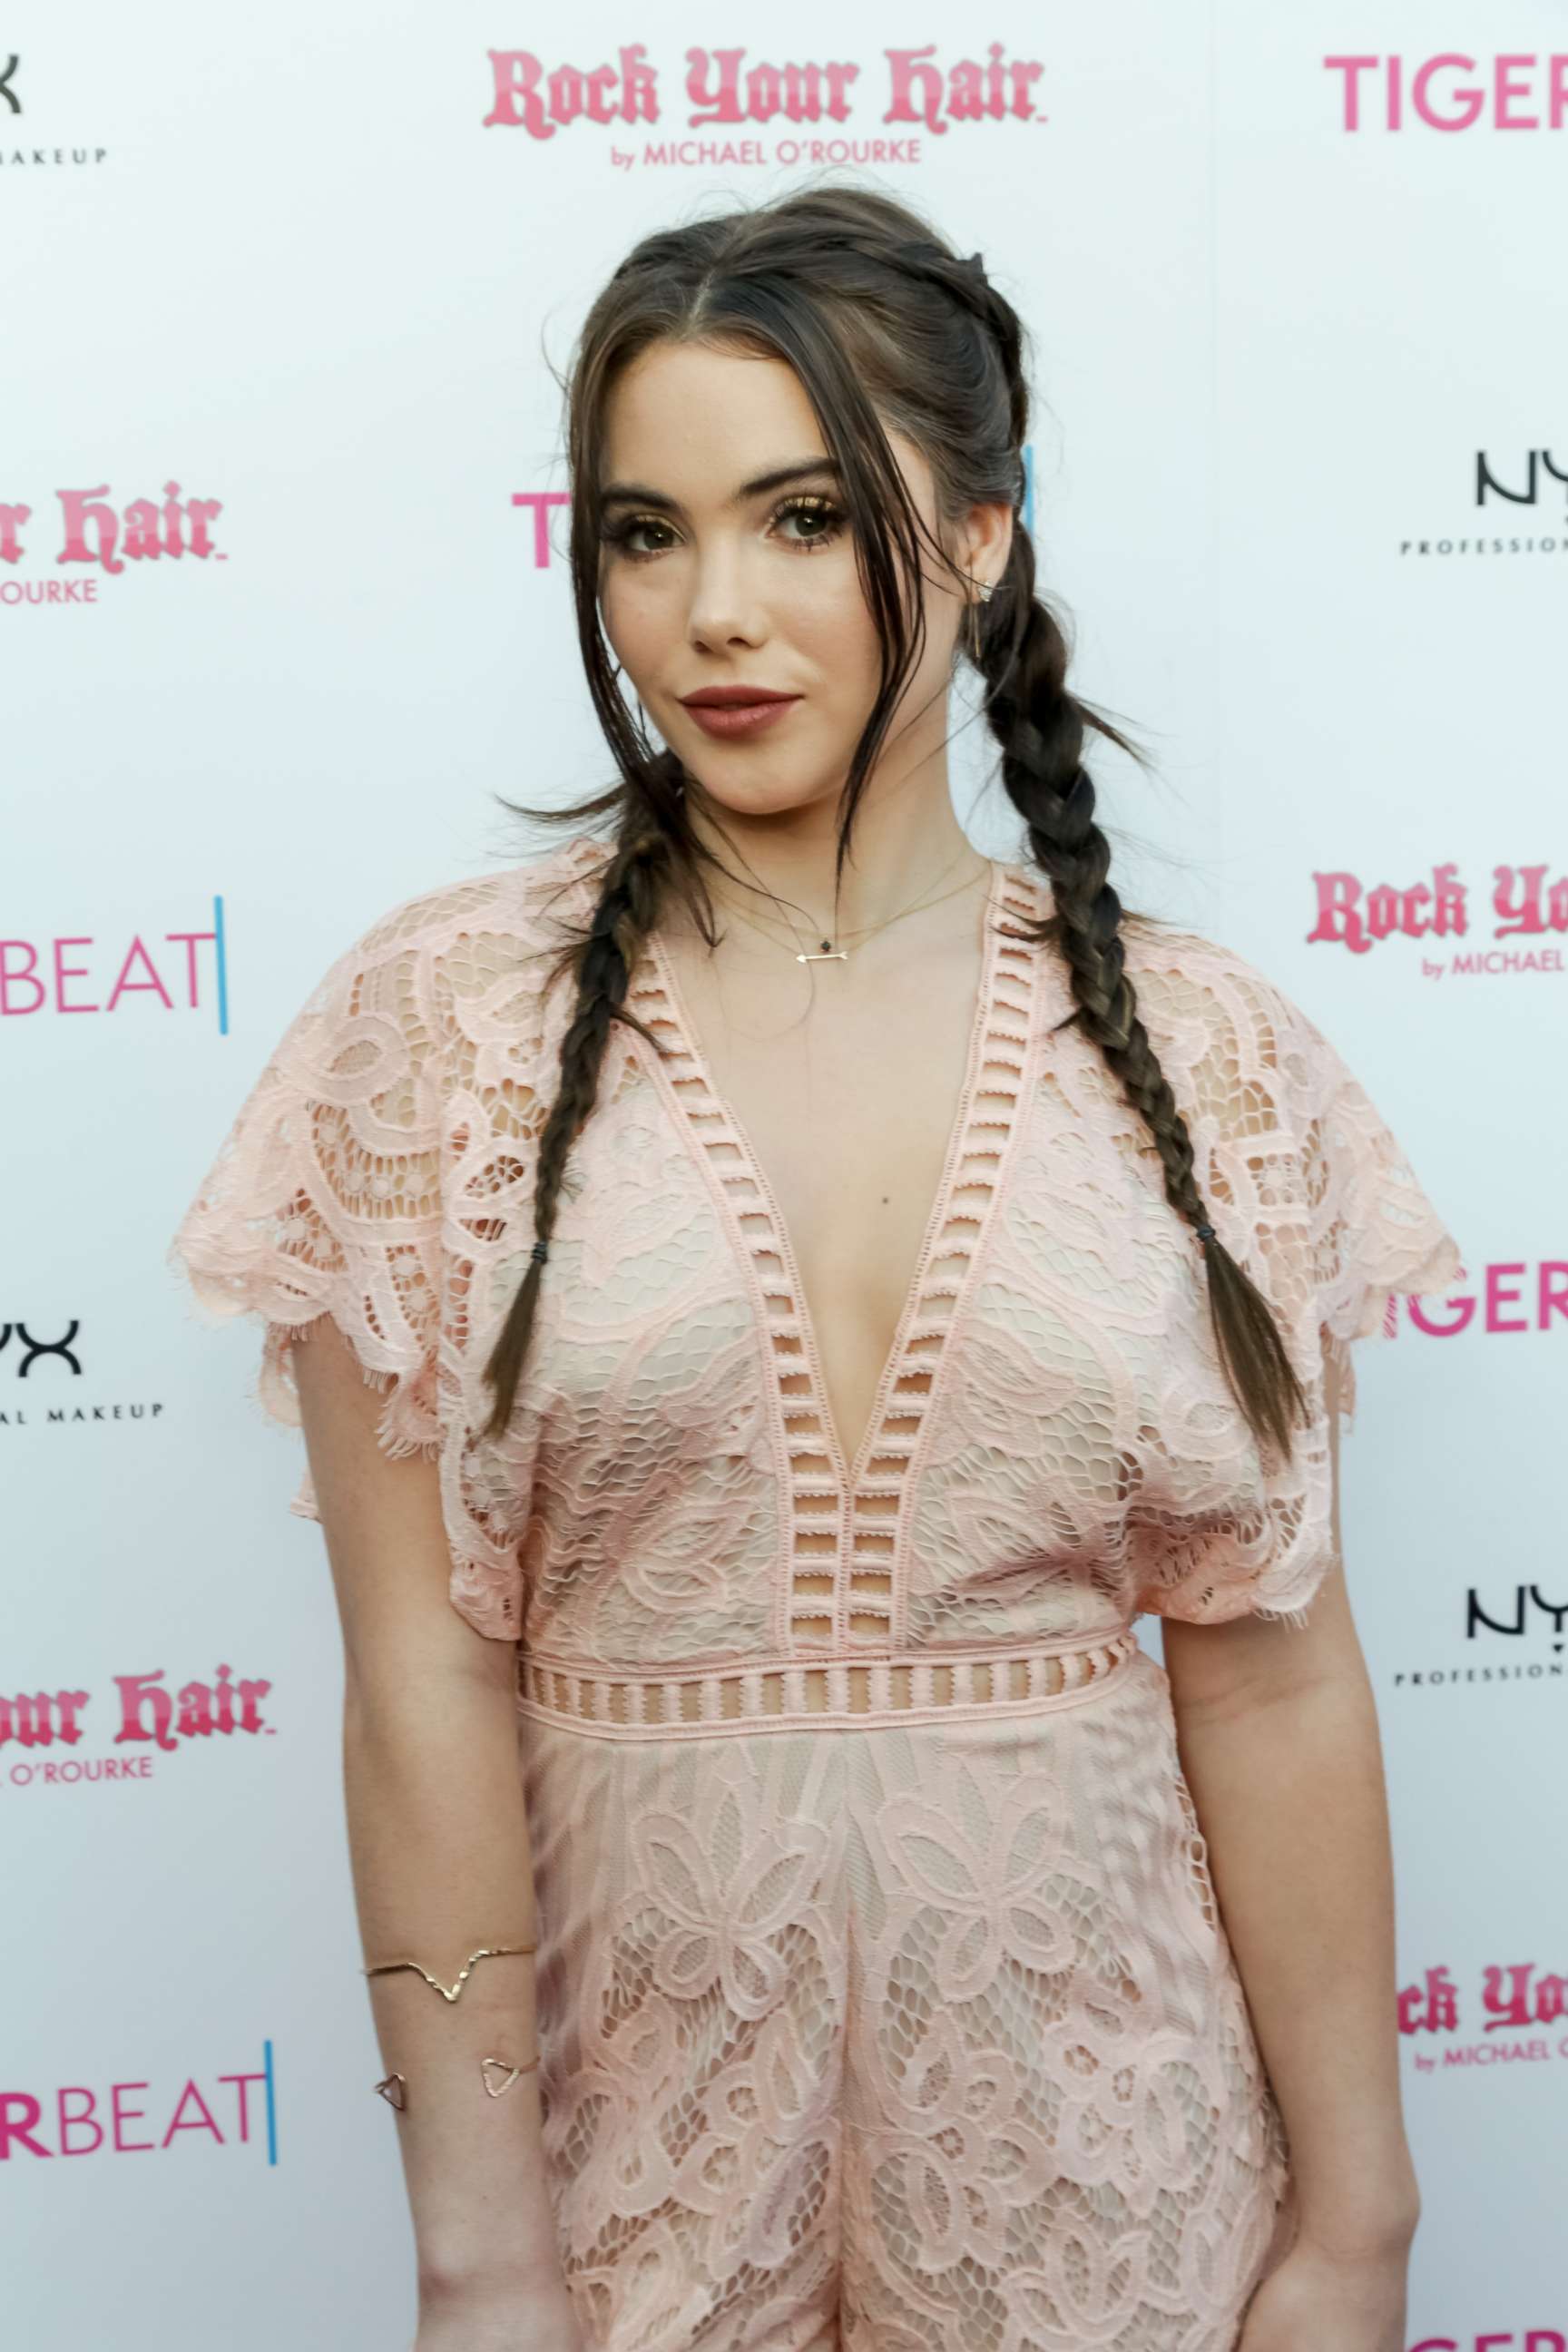 PHOTO: Olympic Gold Medalist McKayla Maroney arrives at the Tiger Beat's Pre-Party Around FOX's Teen Choice Awards, July 28, 2016 in West Hollywood.  